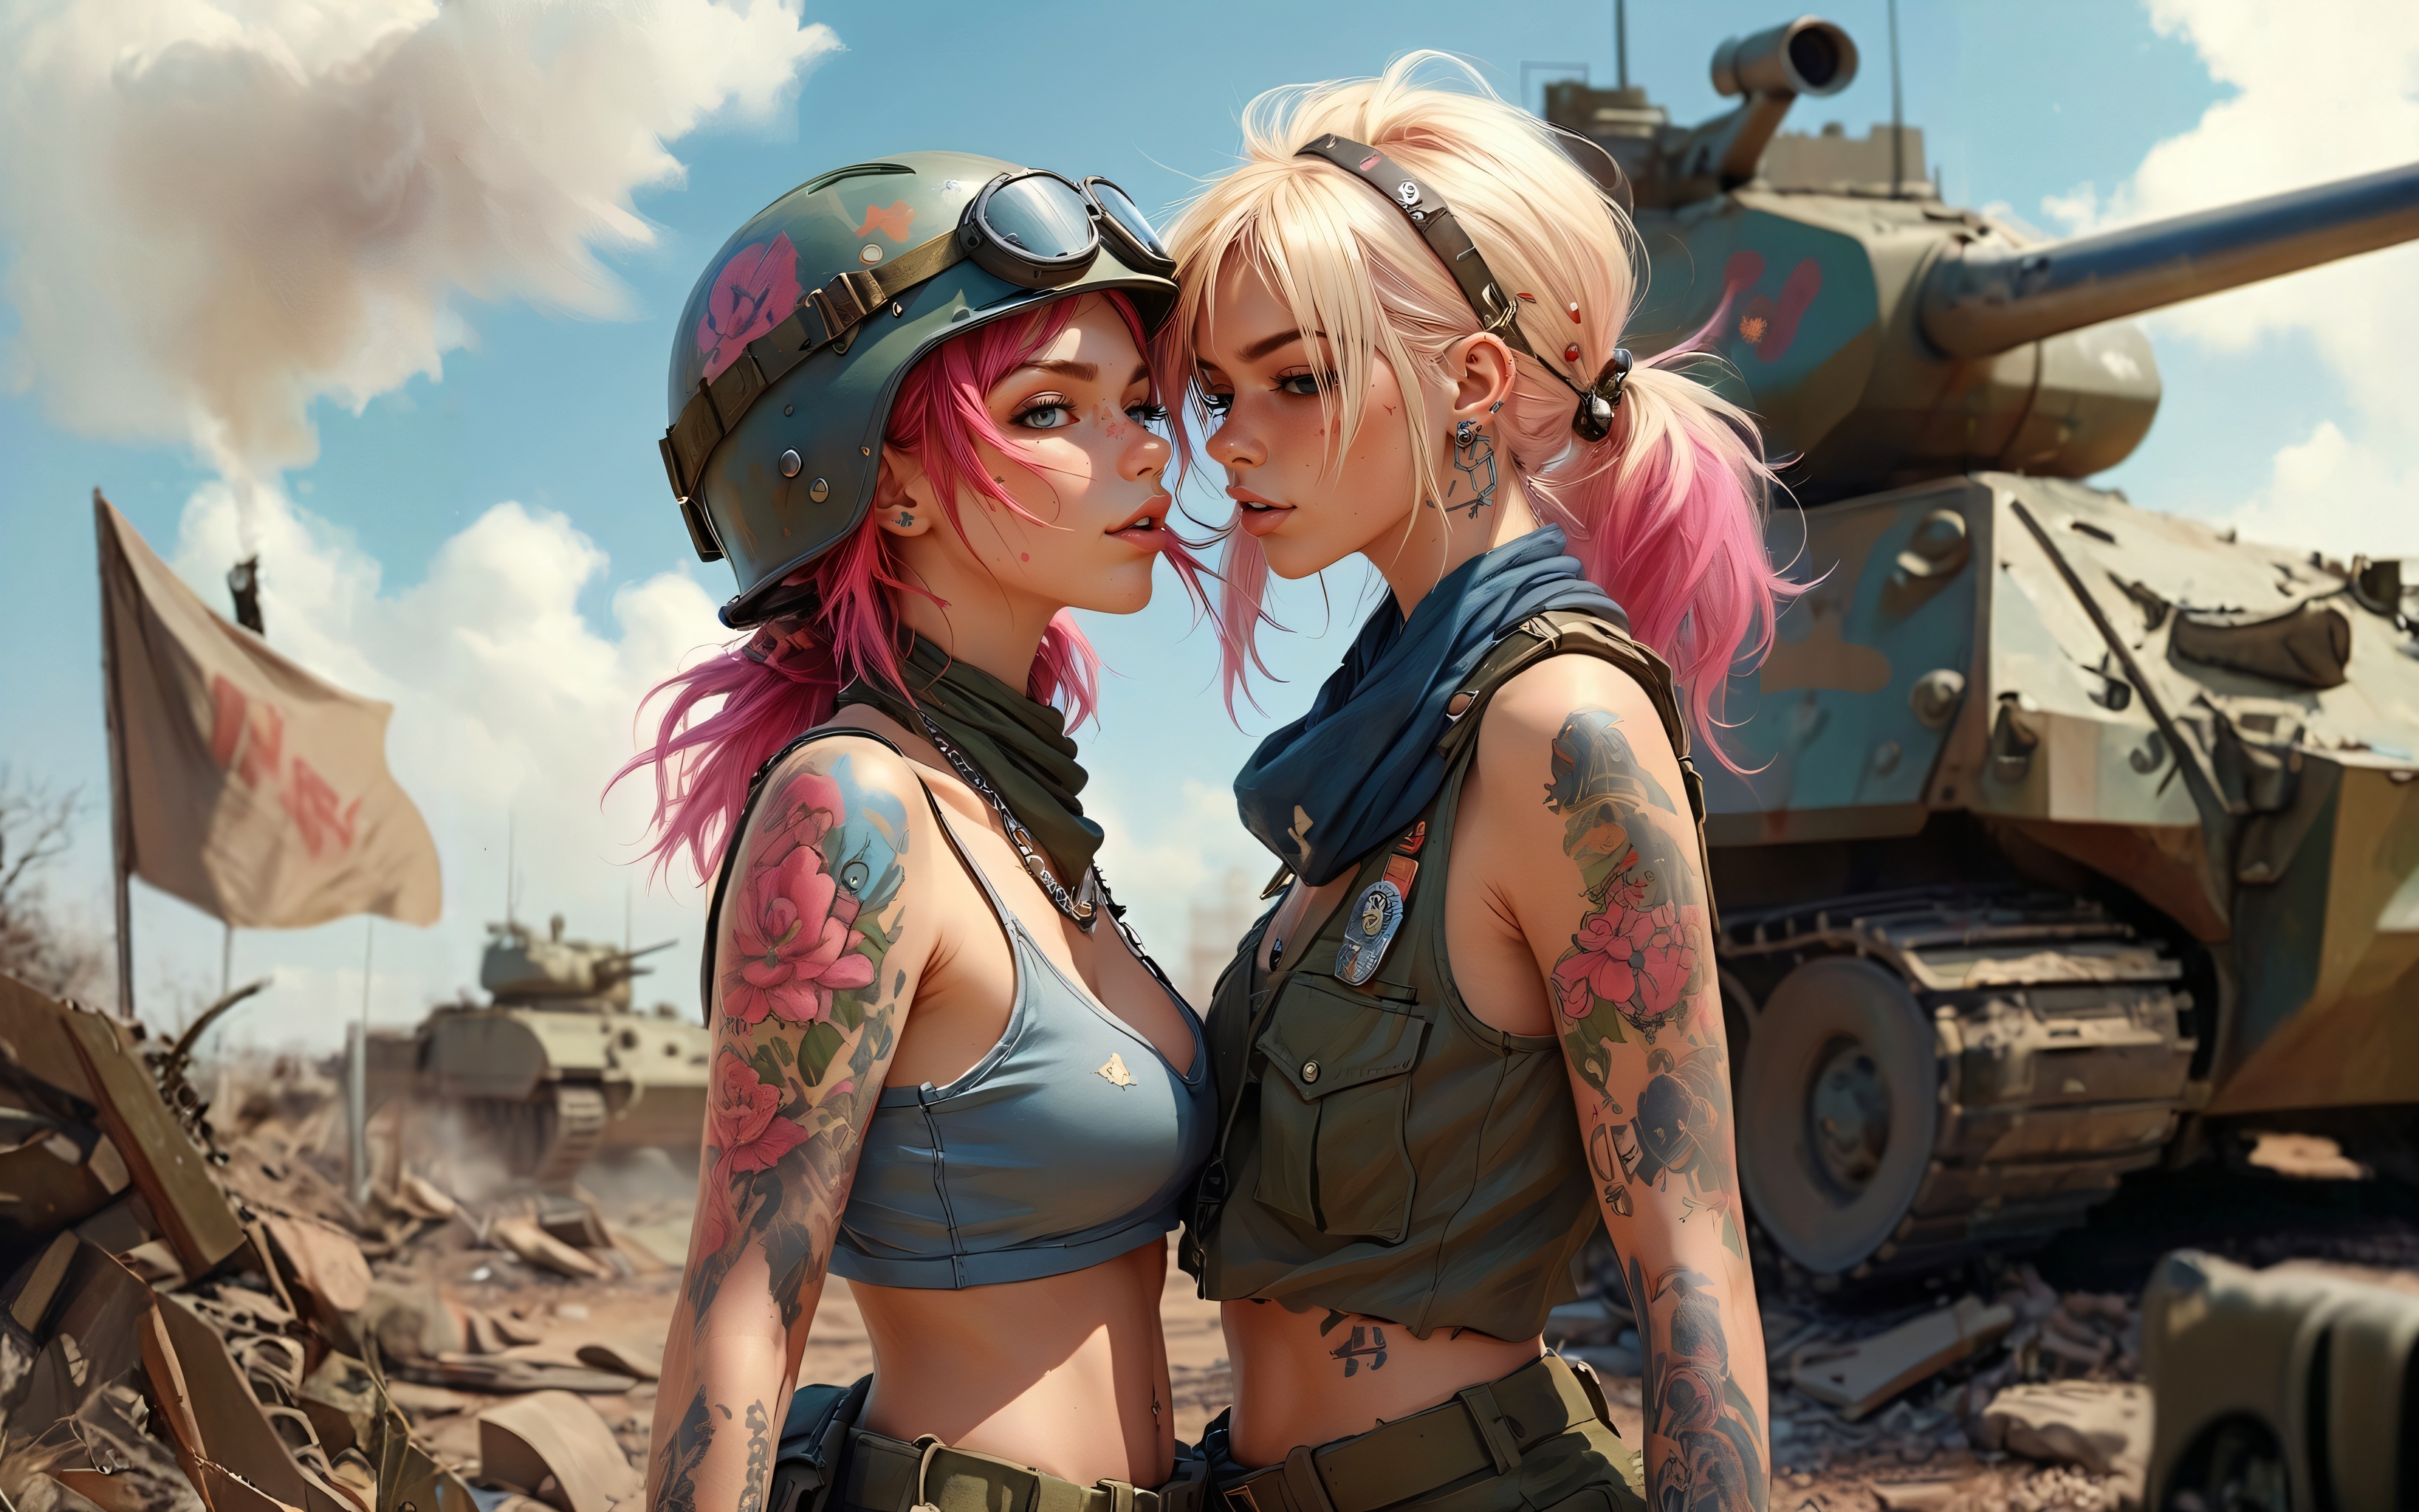 Girls and tanks